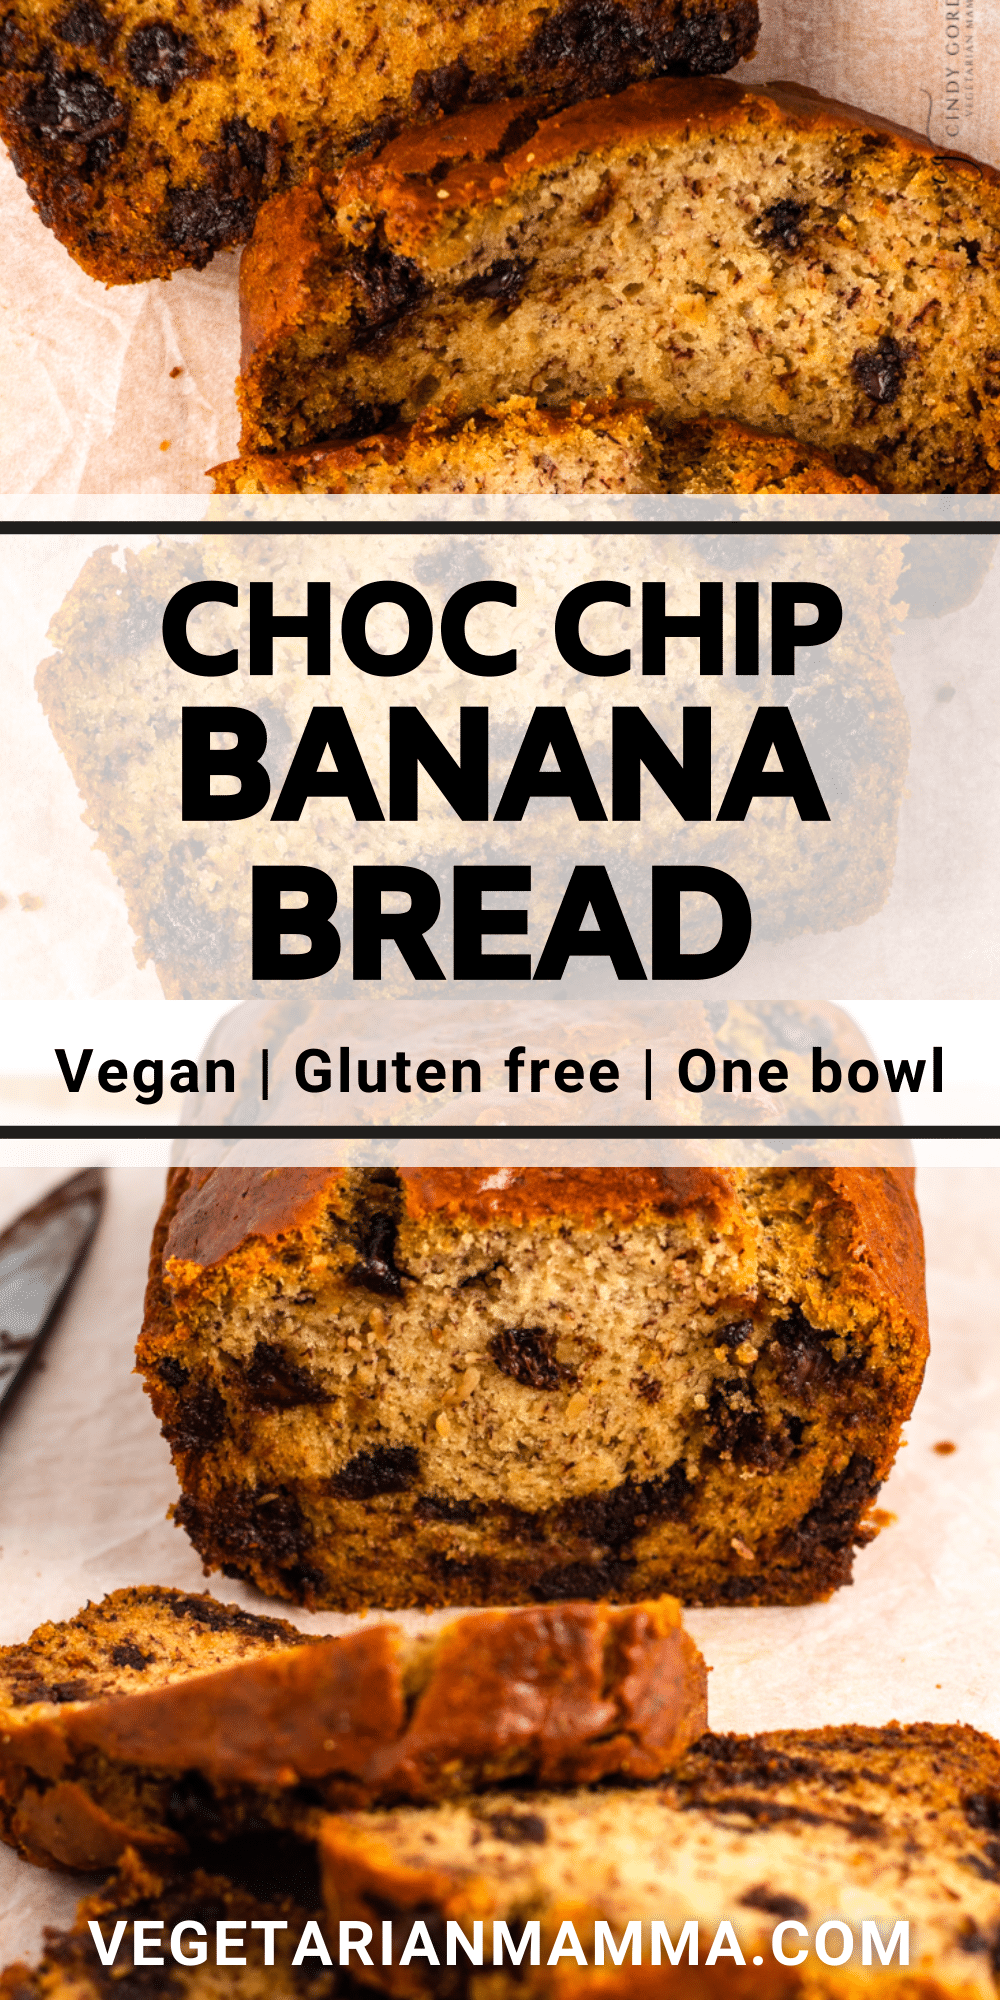 Vegan Chocolate Chip Banana Bread is the best gluten-free loaf ever packed with chocolate chips! This perfectly moist bread is surrounded by a crunchy crust and is great for breakfast or a sweet snack.